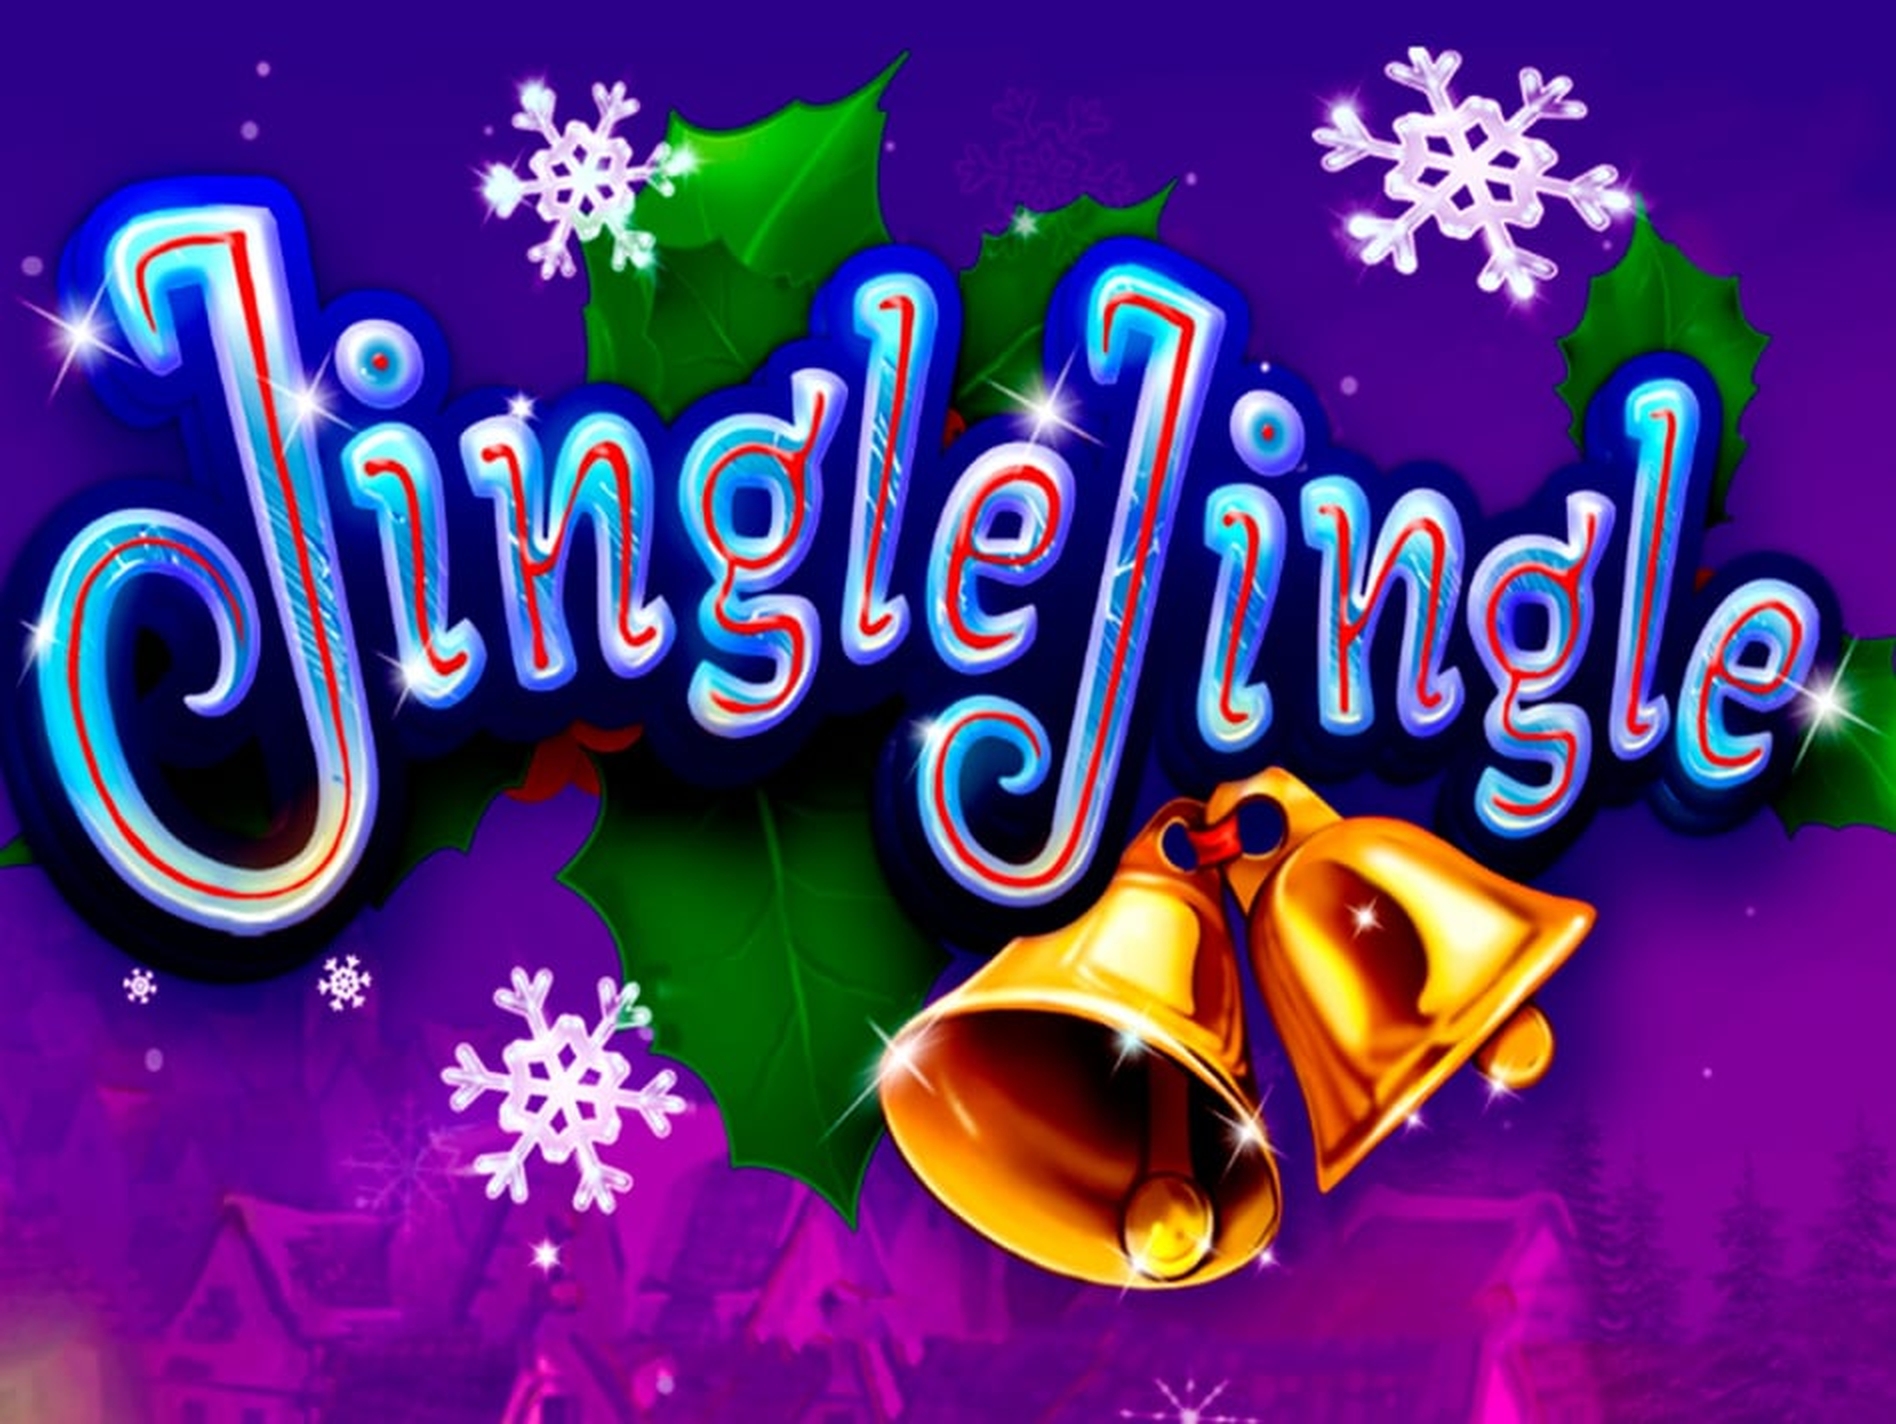 The Jingle Jingle Online Slot Demo Game by Booming Games